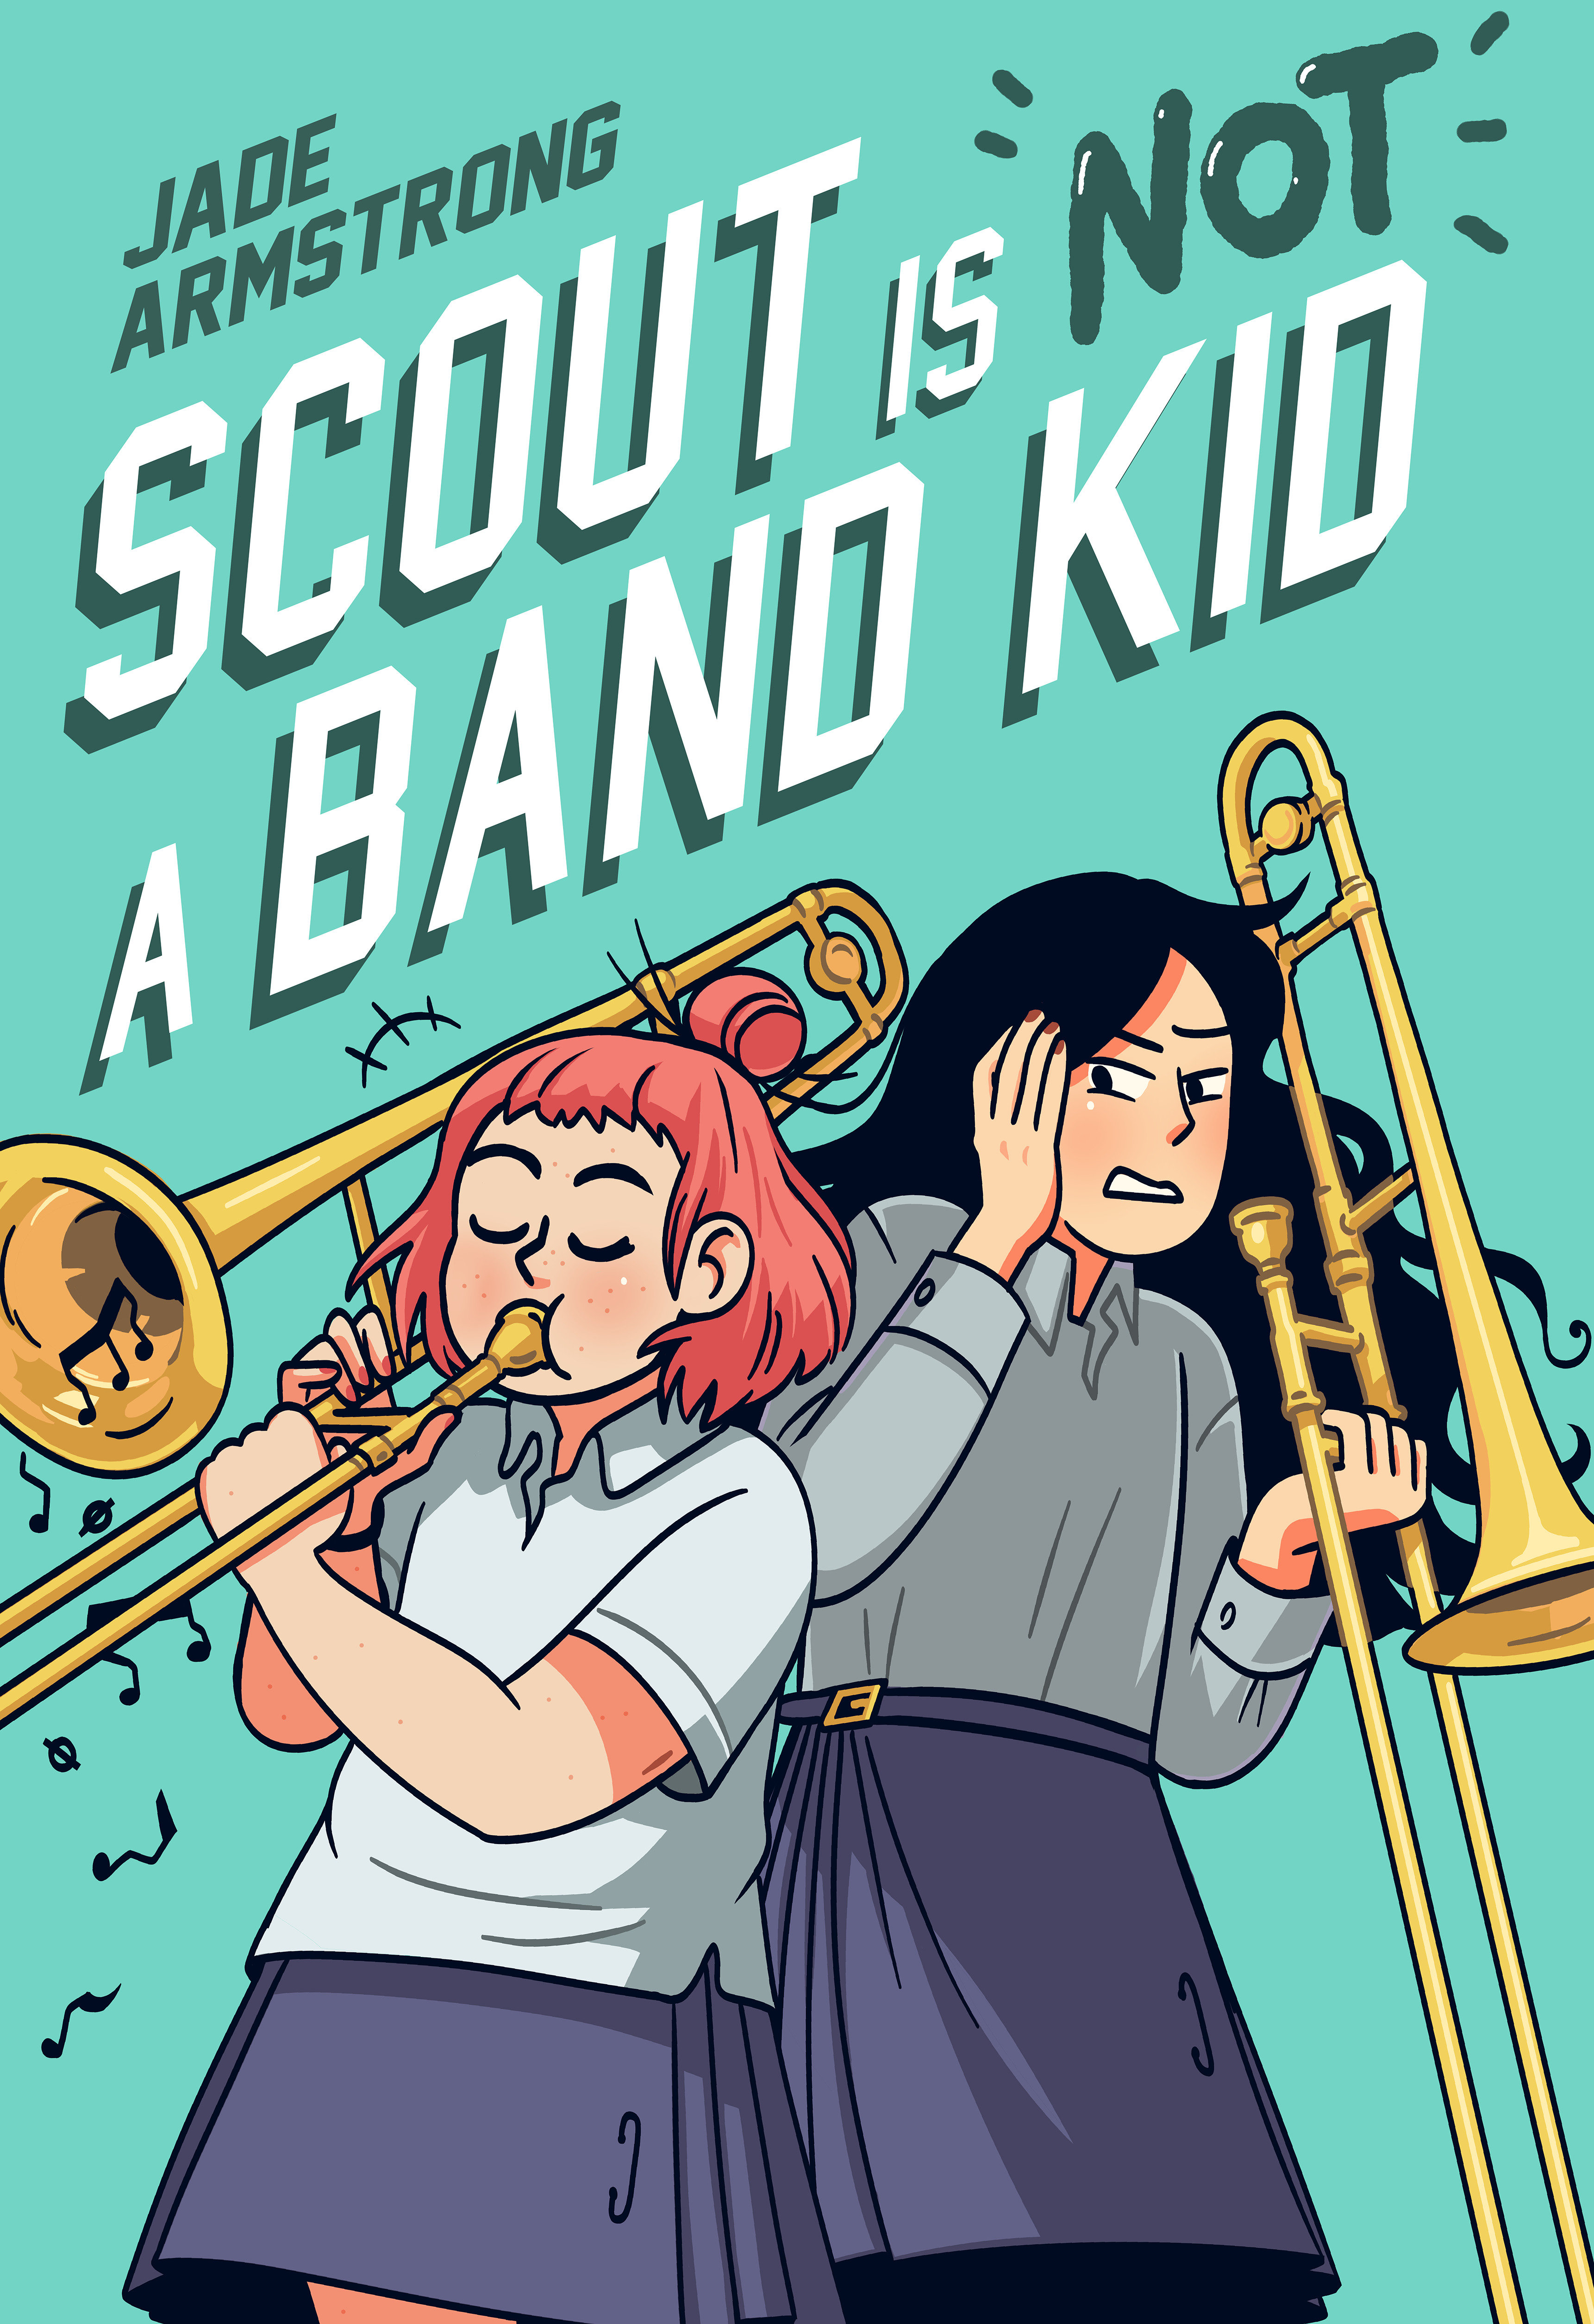 Scout Is Not A Band Kid Hardcover